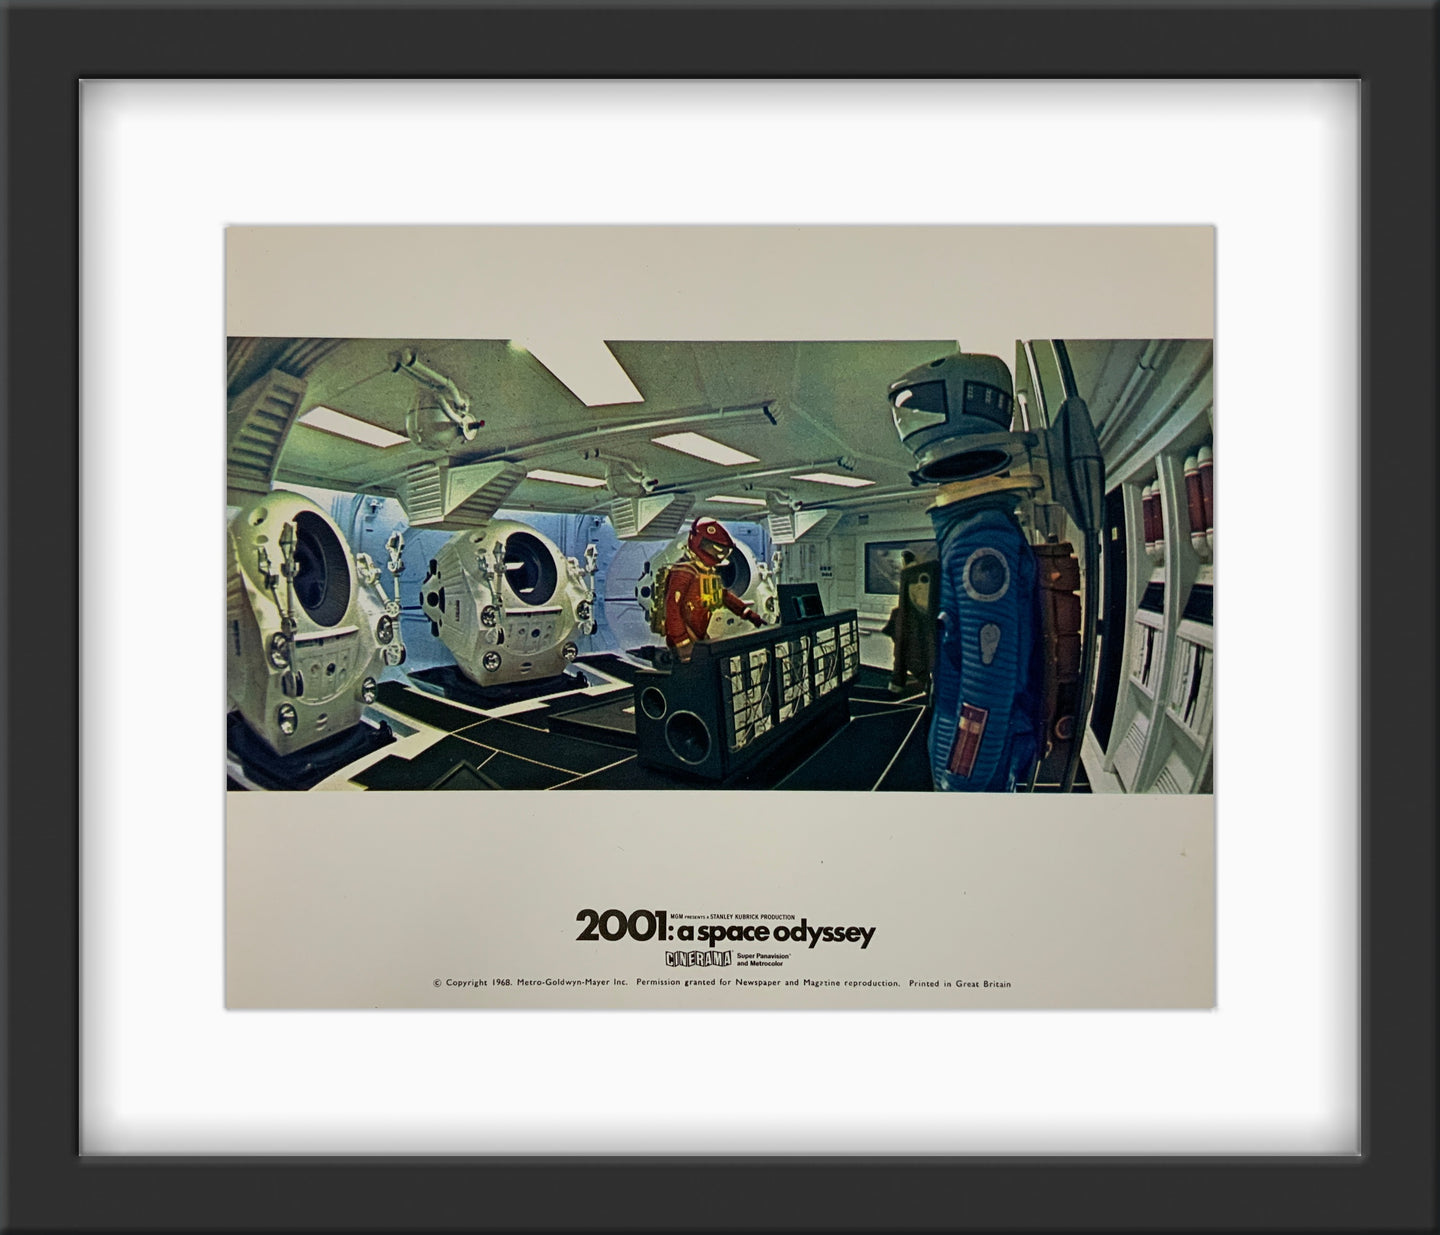 An original 8x10 lobby card for the Stanley Kubrick film 2001 A Space Odyssey